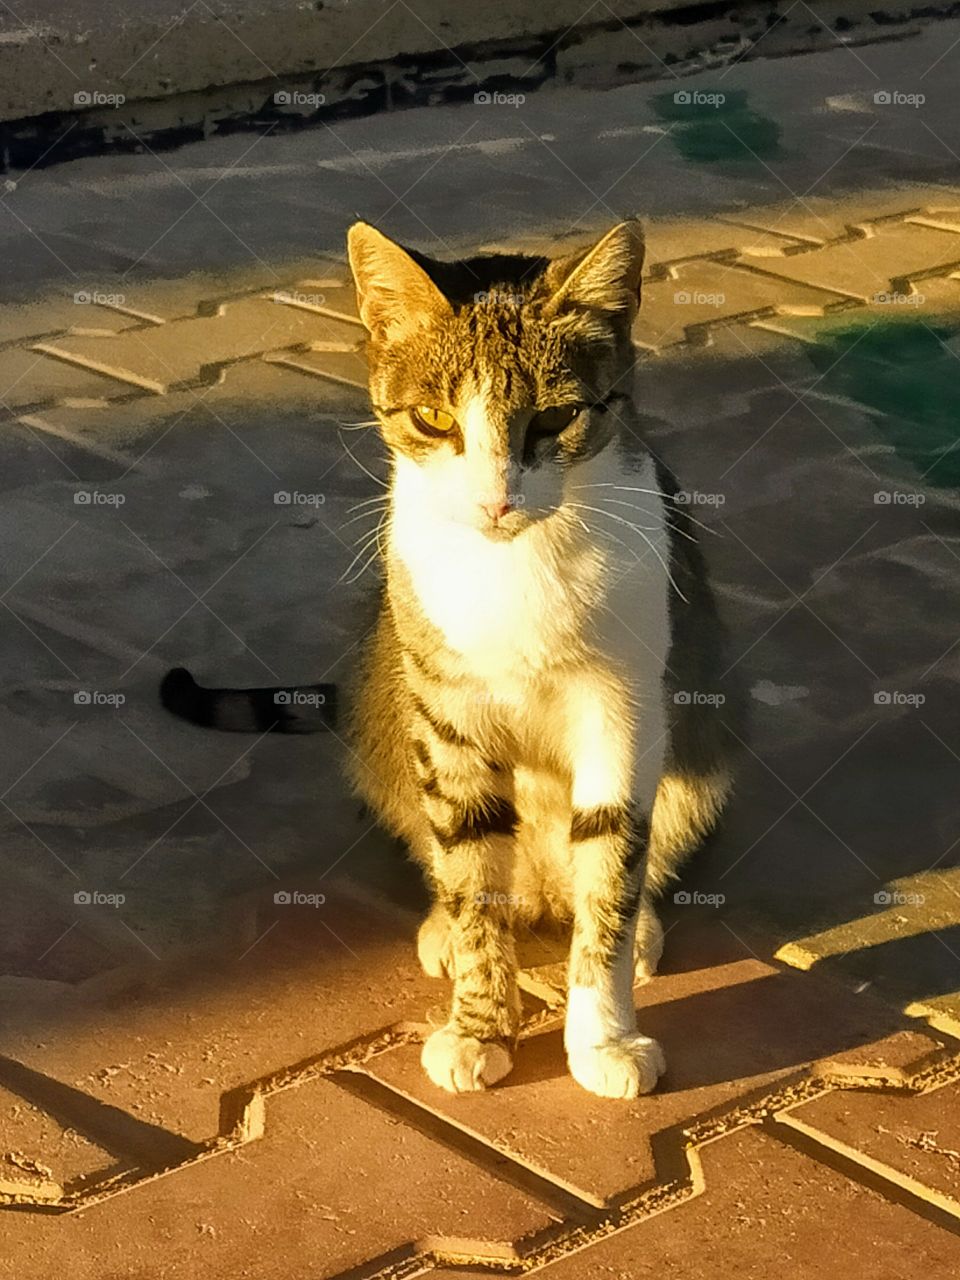 A cat seen the schoolyard.It stands in a majestic way,so I decide to take a shot of it.